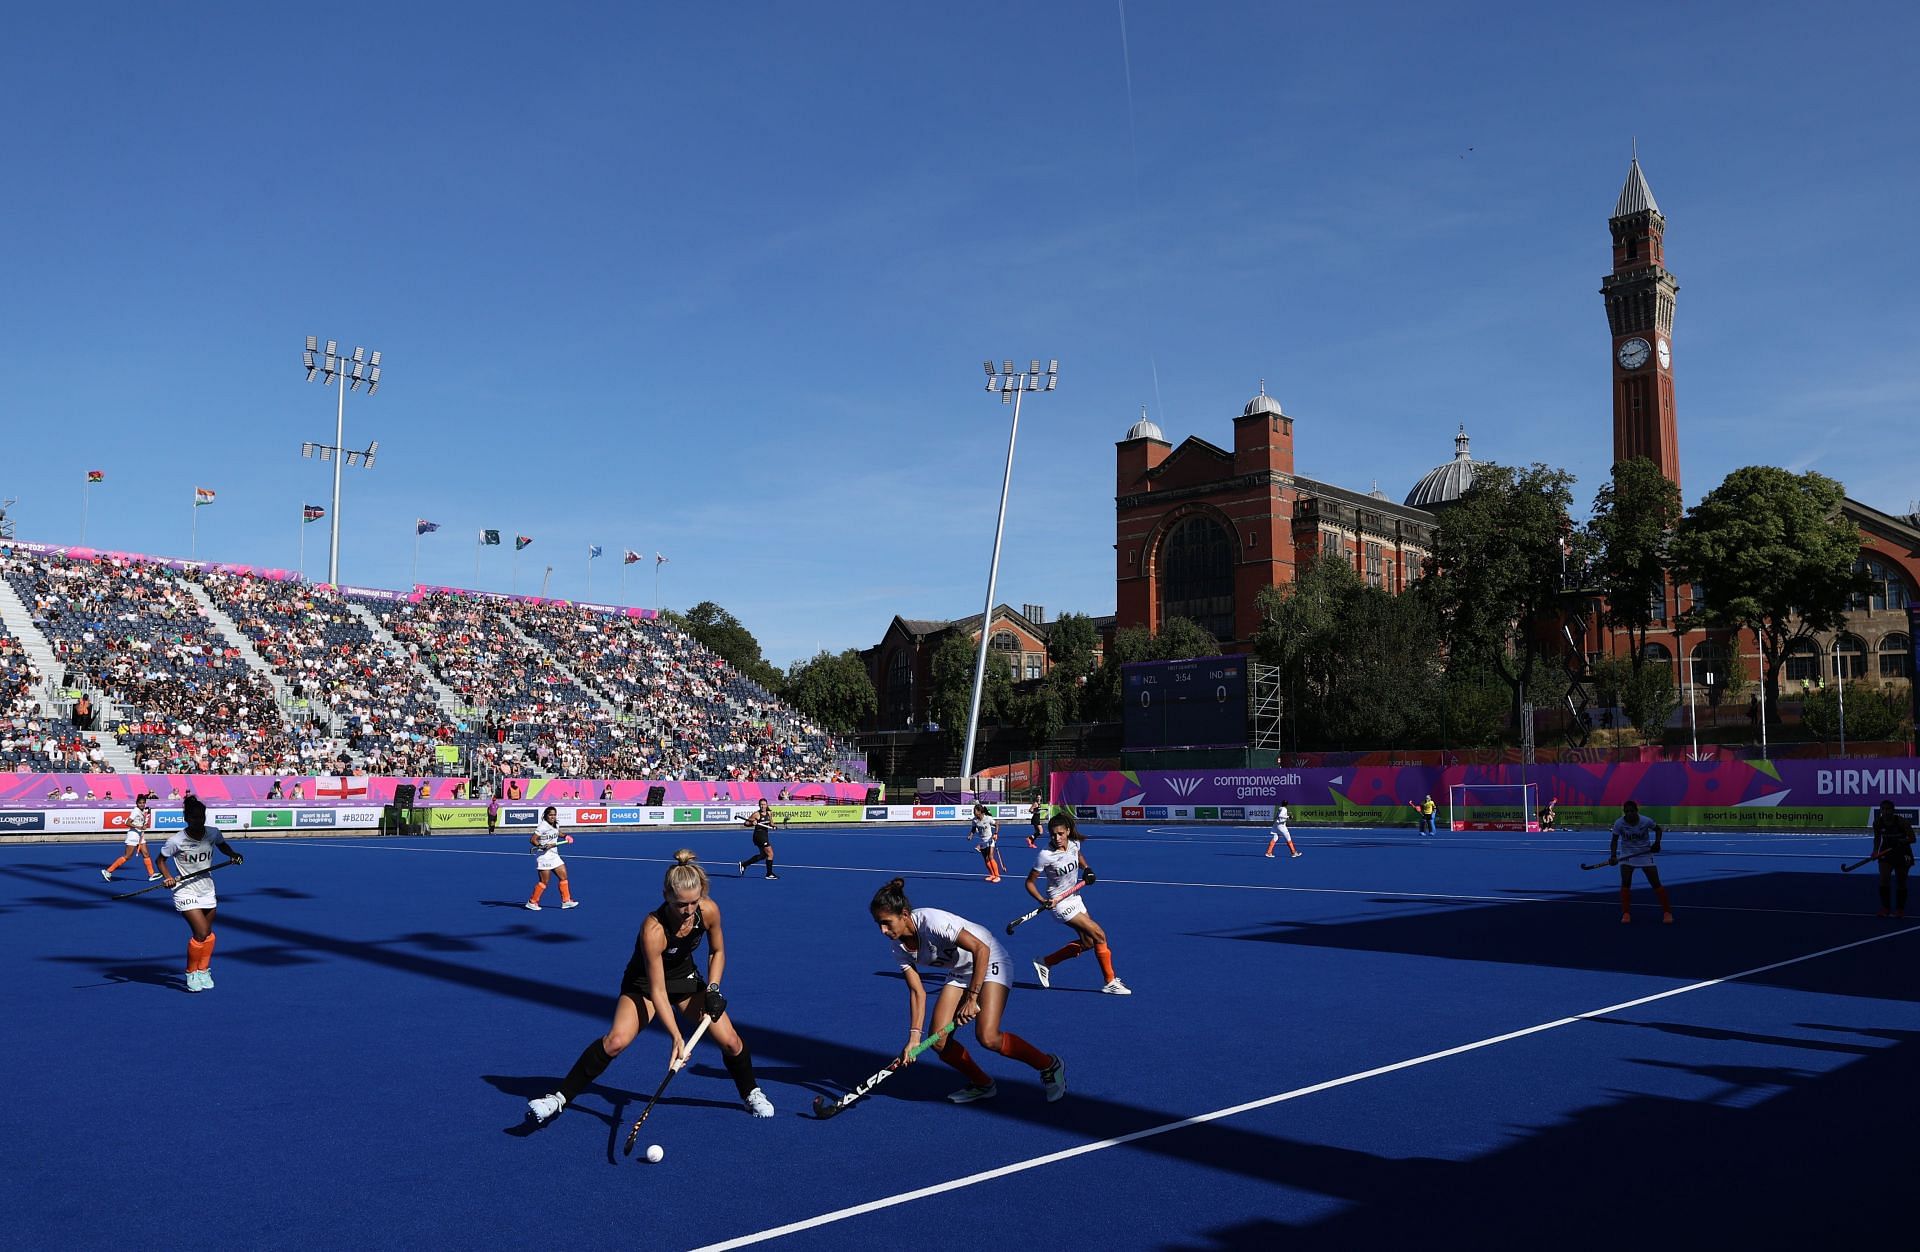 Hockey - Commonwealth Games: Day 10 (Image courtesy: Getty)